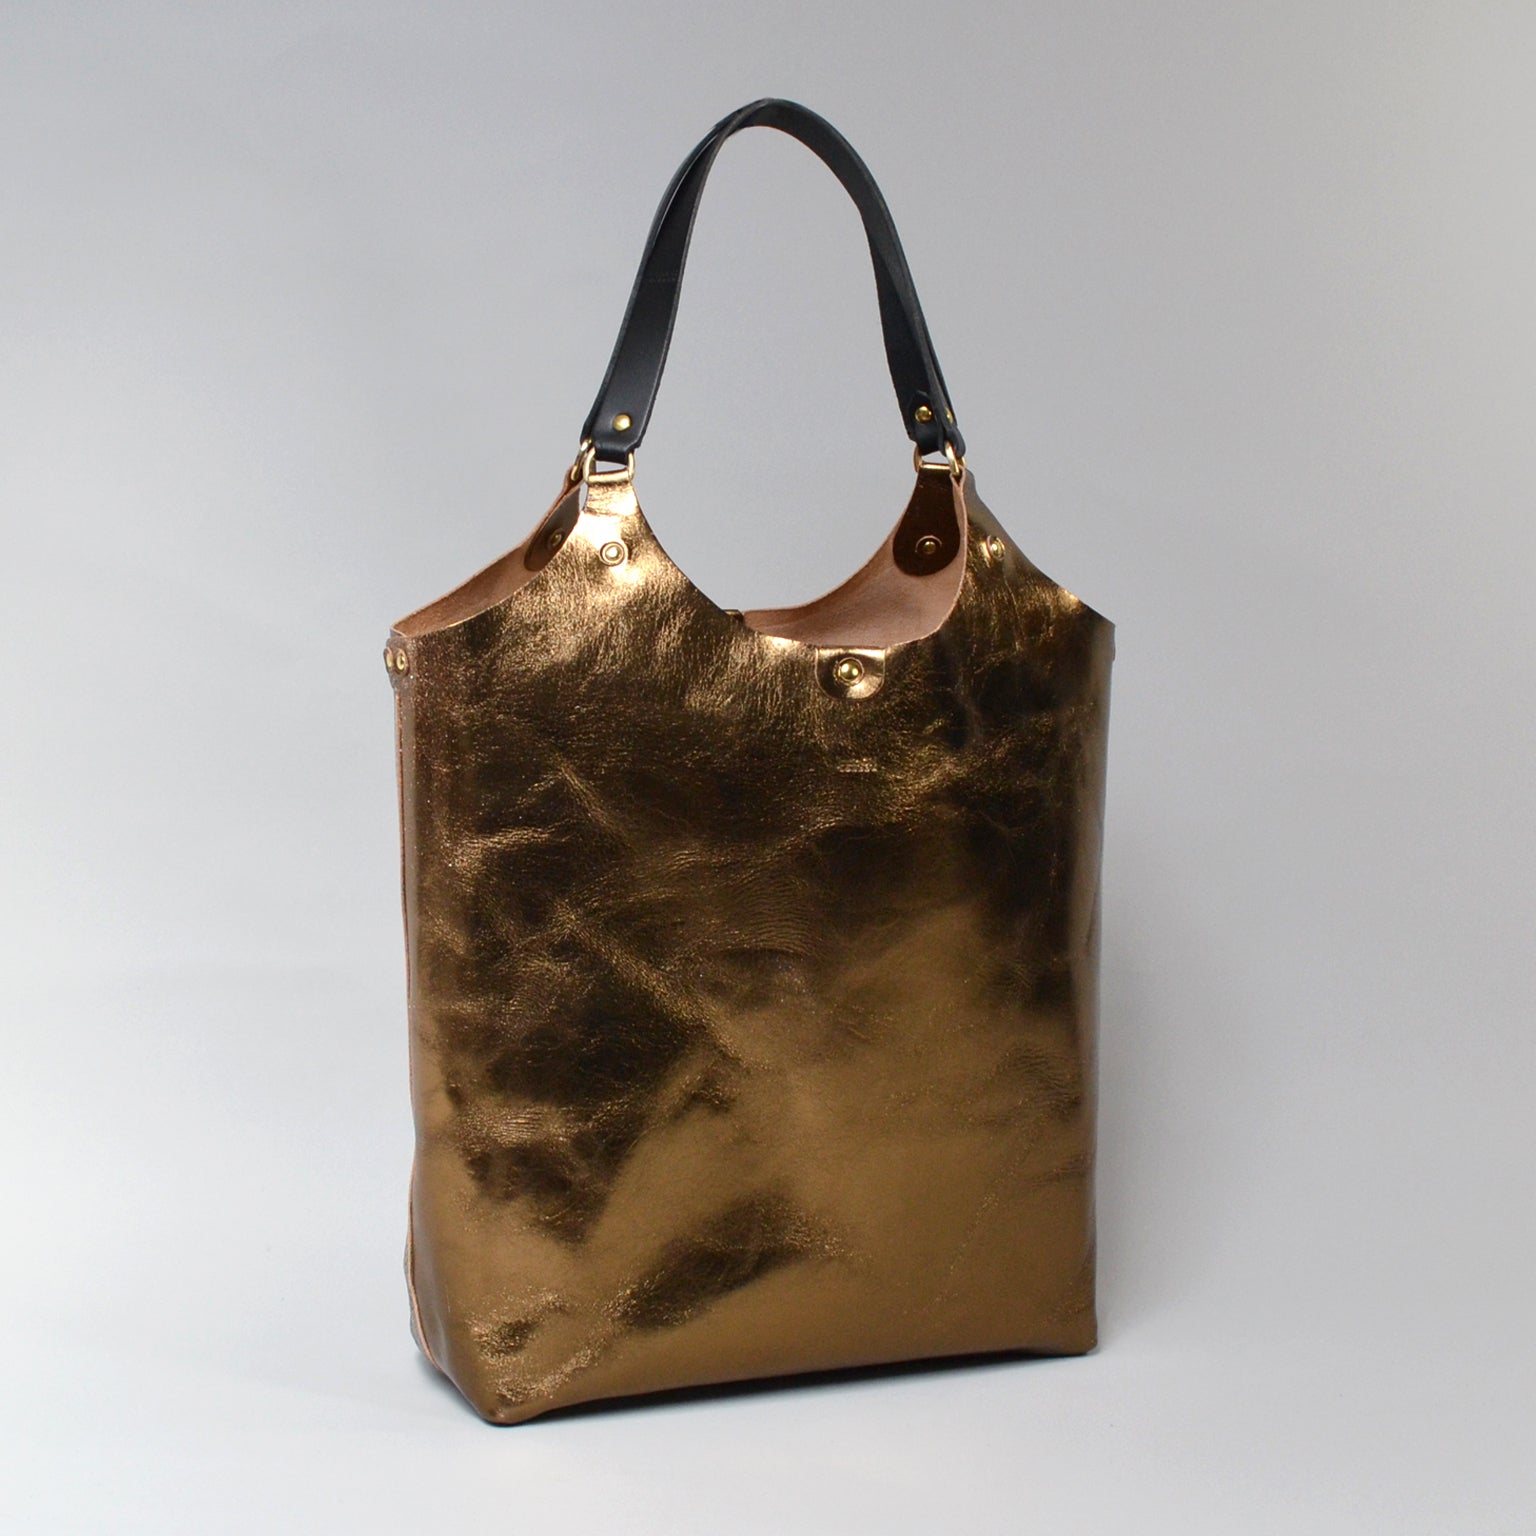 MARY <br/> Foiled Leather Tote Bag <br/> Bronze